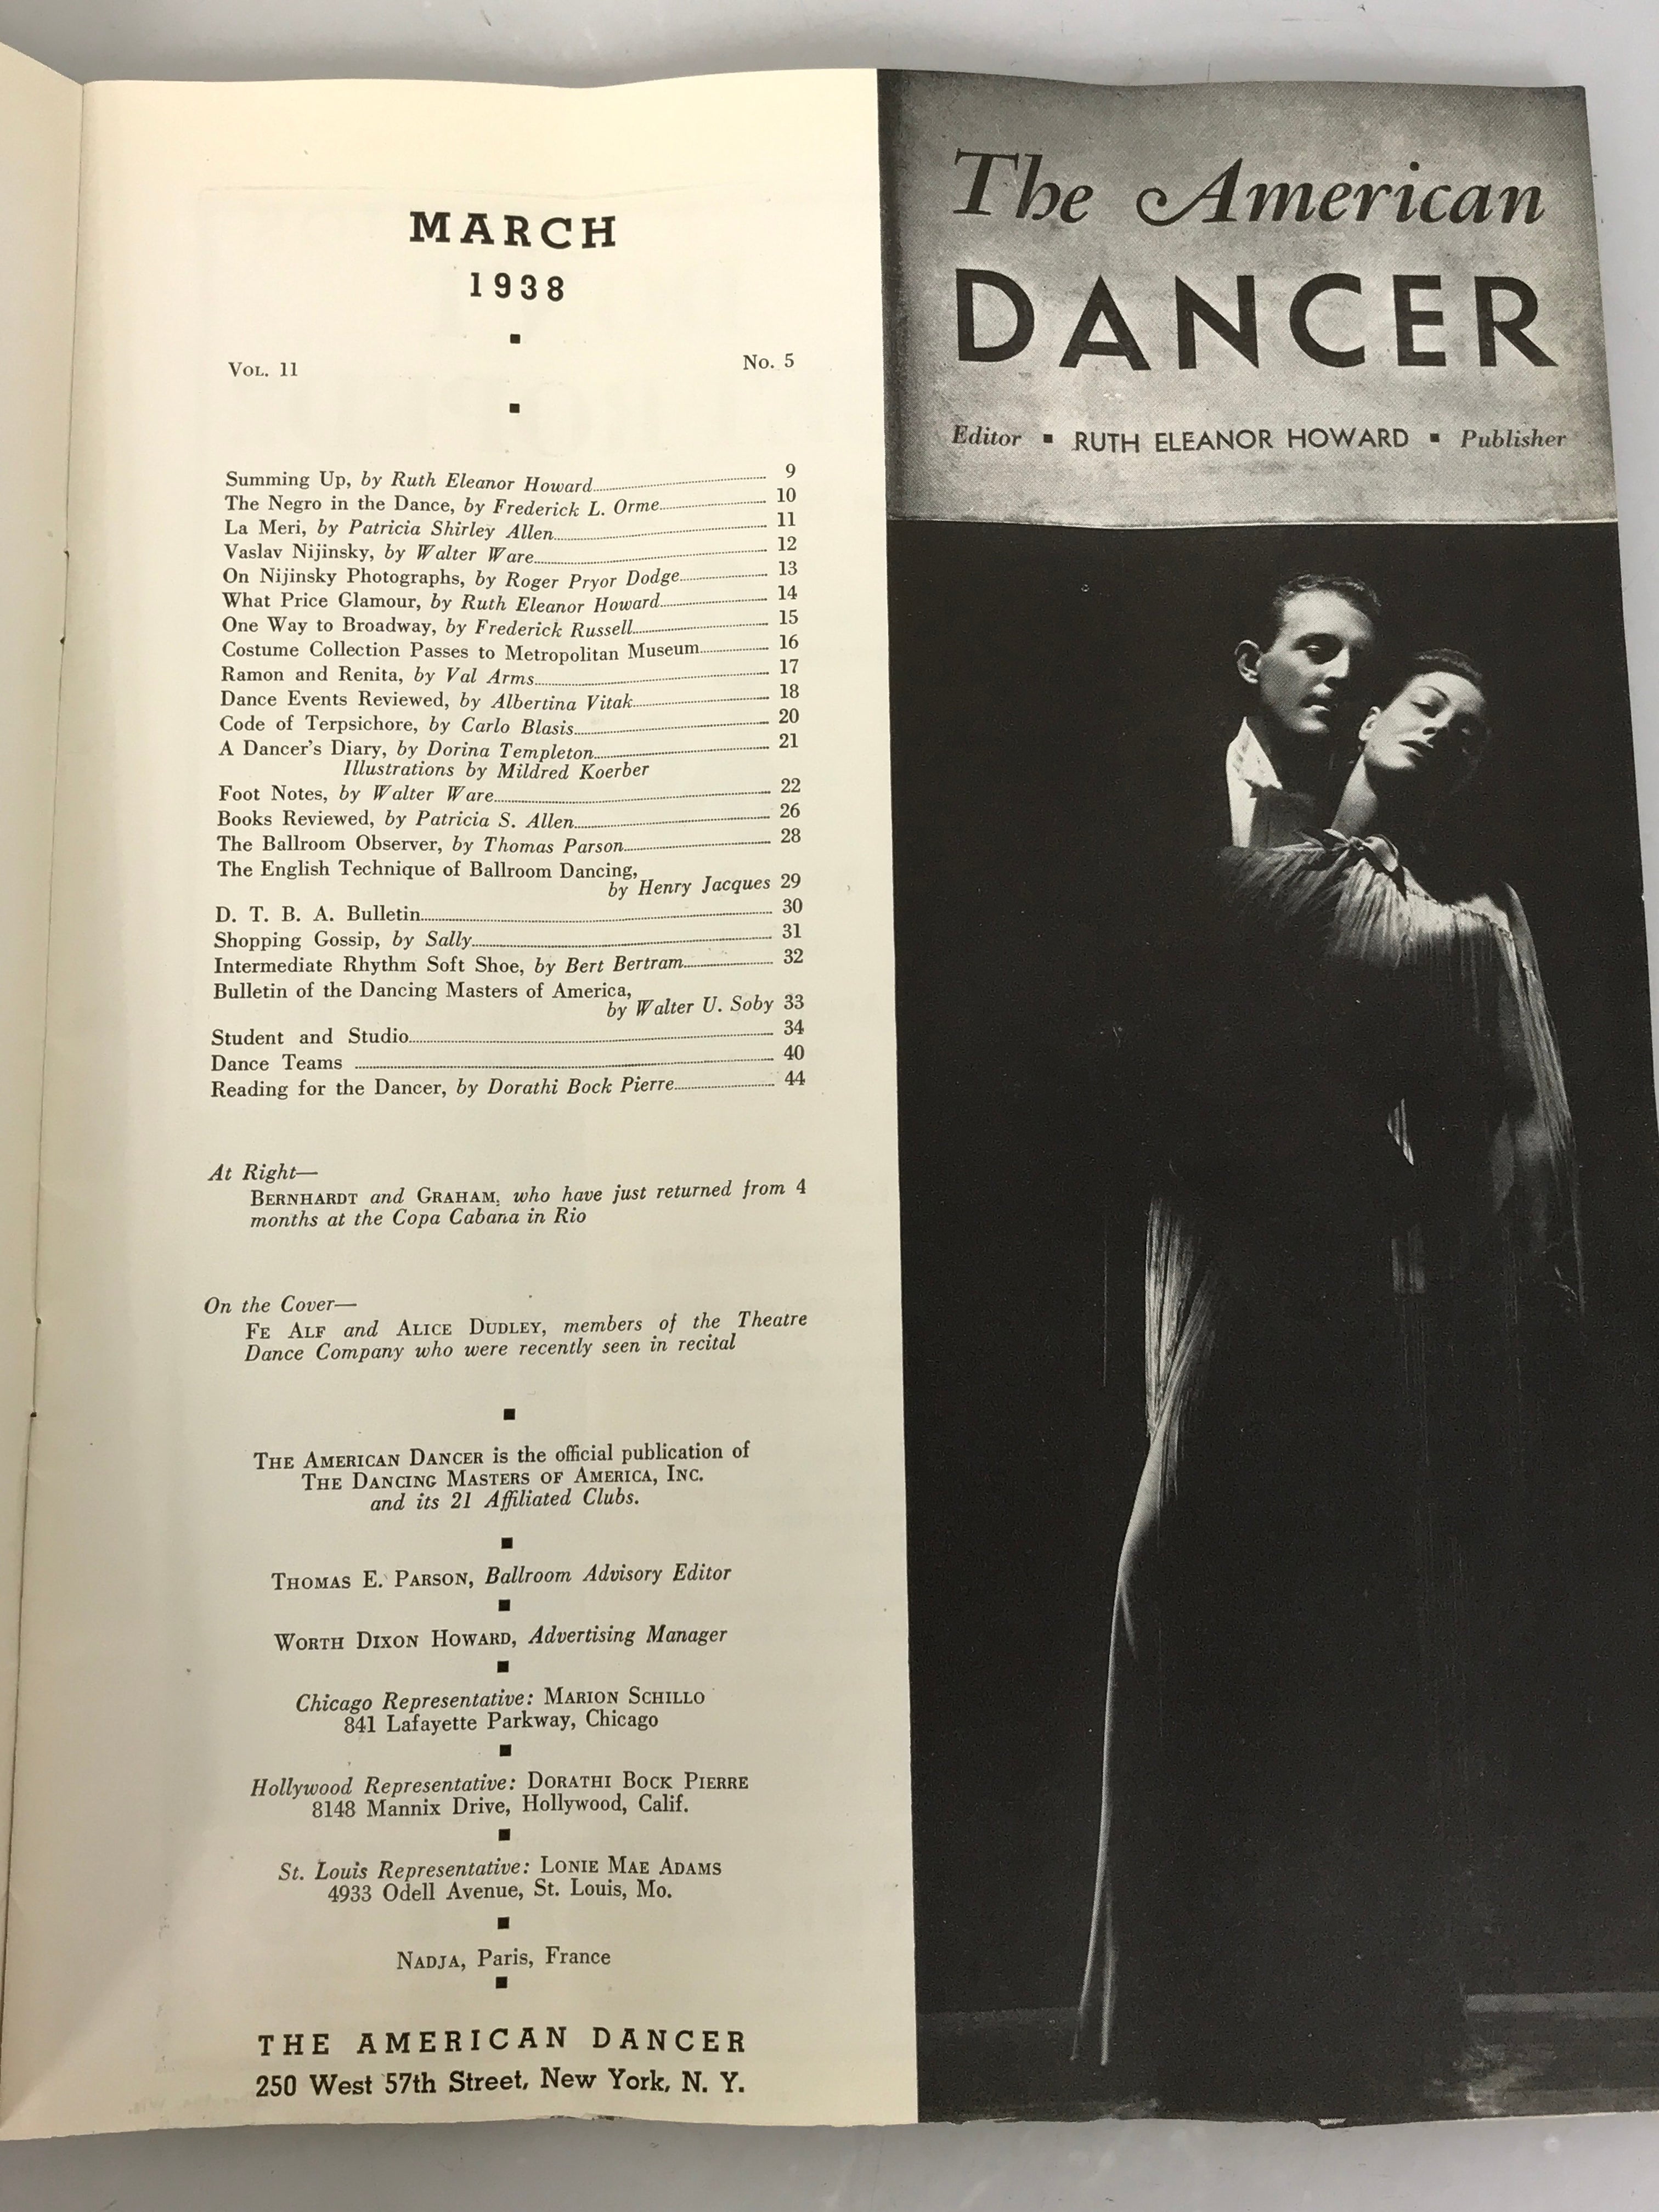 Lot of 8 Vintage The American Dancer Magazines Rare 1938 Issues